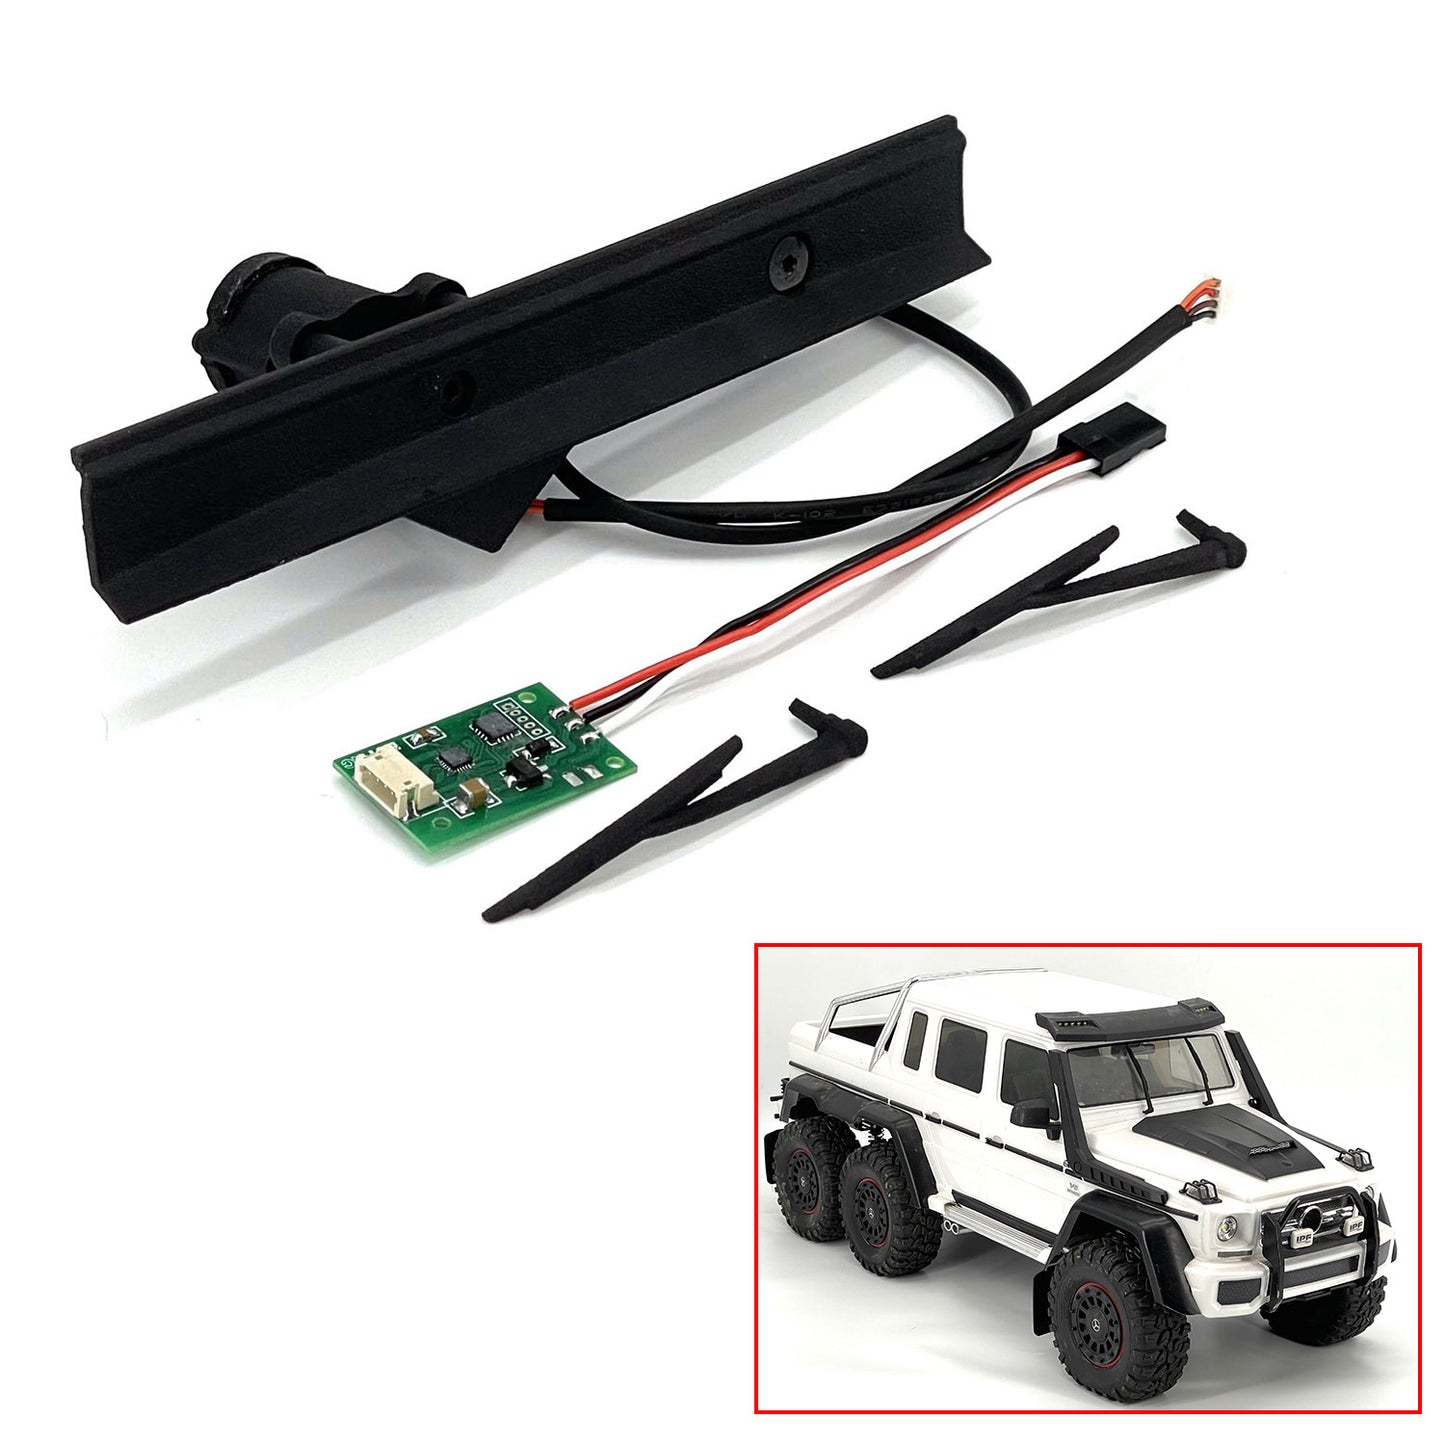 Electric Windscreen Wiper for 1/10 RC Crawler Car Radio Control Off-road Vehicle Hobby Model DIY Accessory Parts